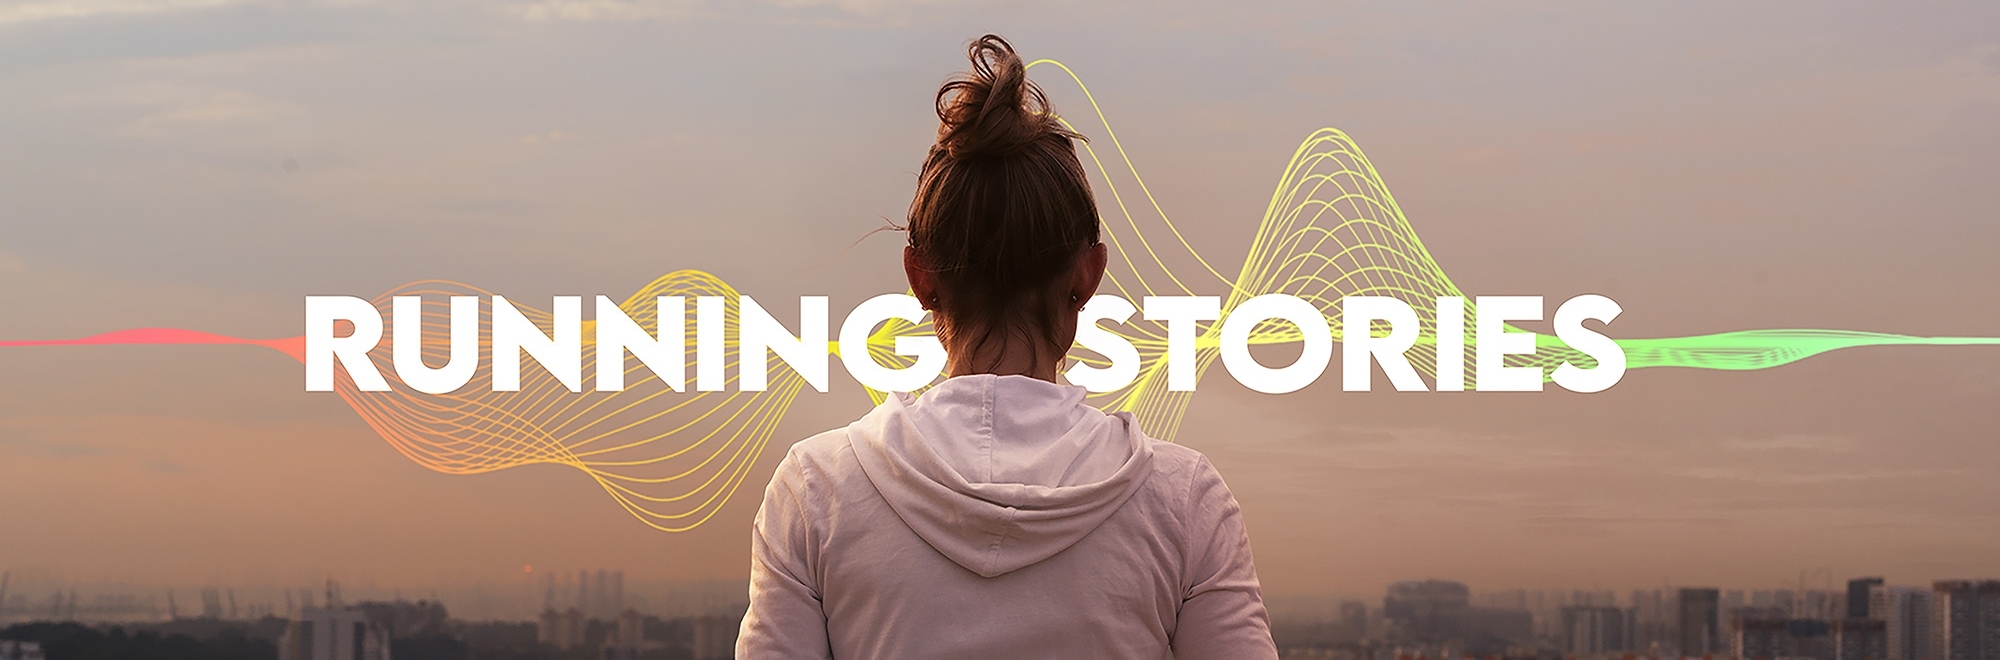 BBH Singapore launches Running Stories app combining fitness and entertainment